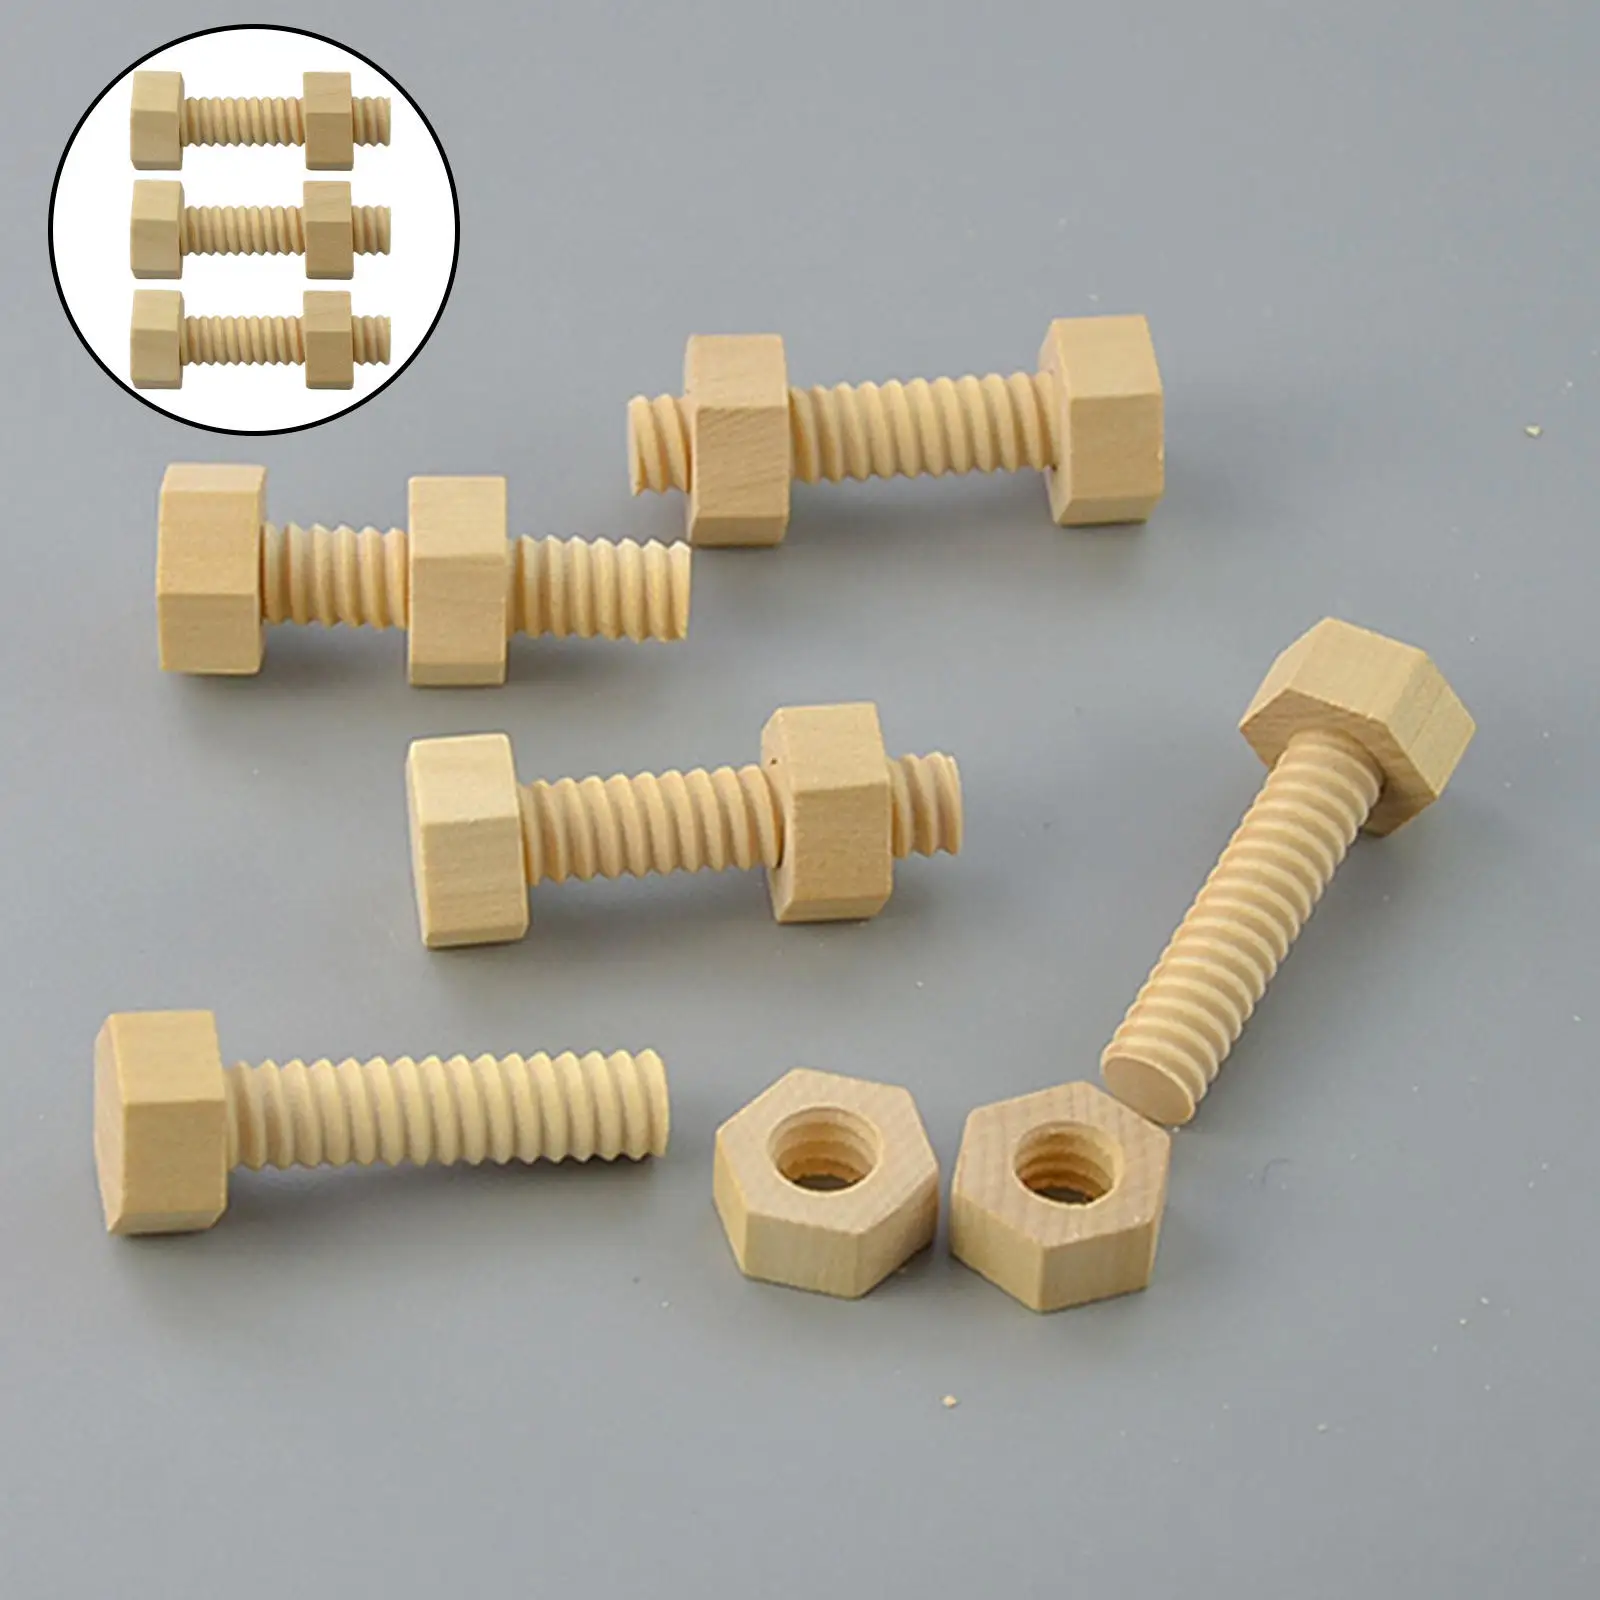 Wooden Screw Nut Assembling Toy Montessori Hands-On Teaching Aid Nesting Gift Game Educational Toys Wood Screw Nut Toy for Baby